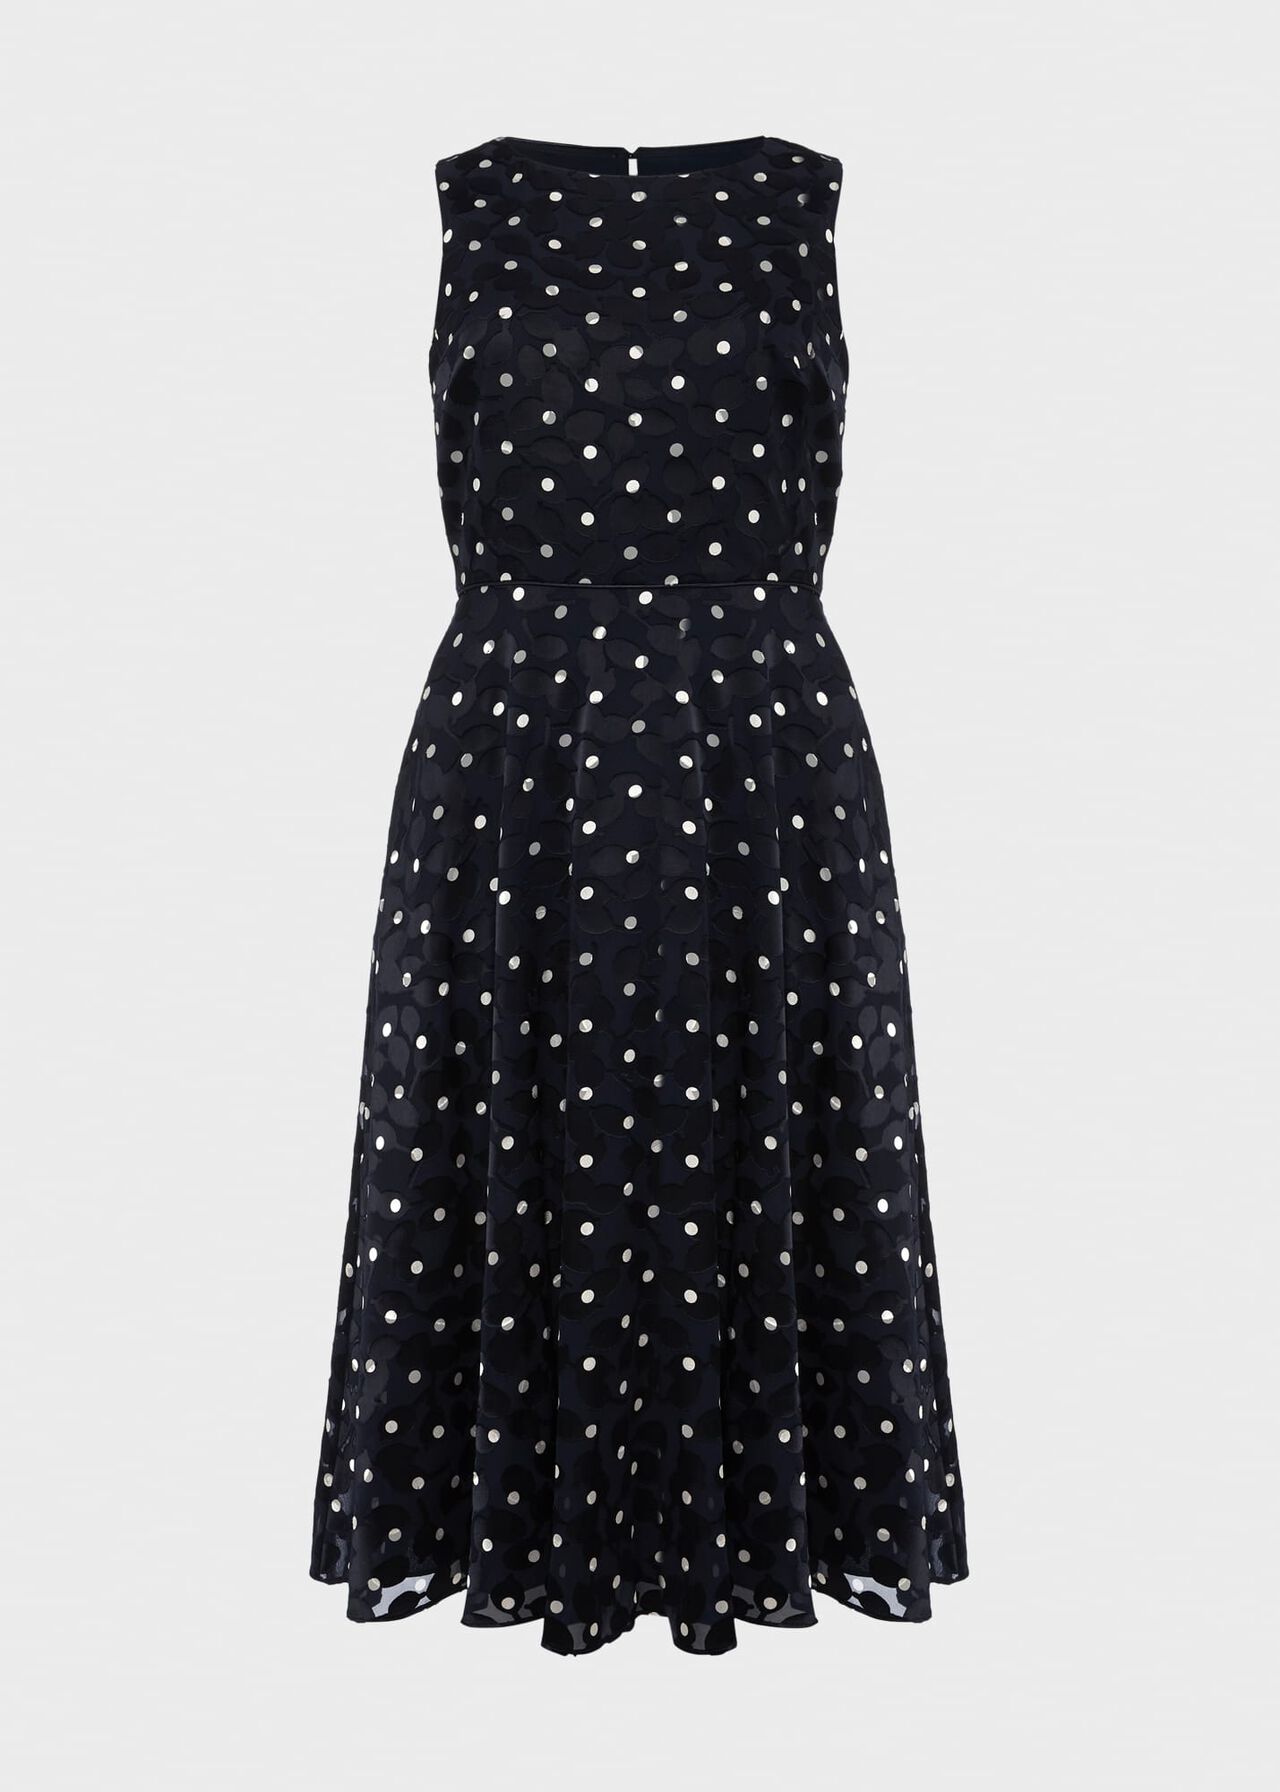 Adeline Spot Fit And Flare Dress, Navy Ivory, hi-res